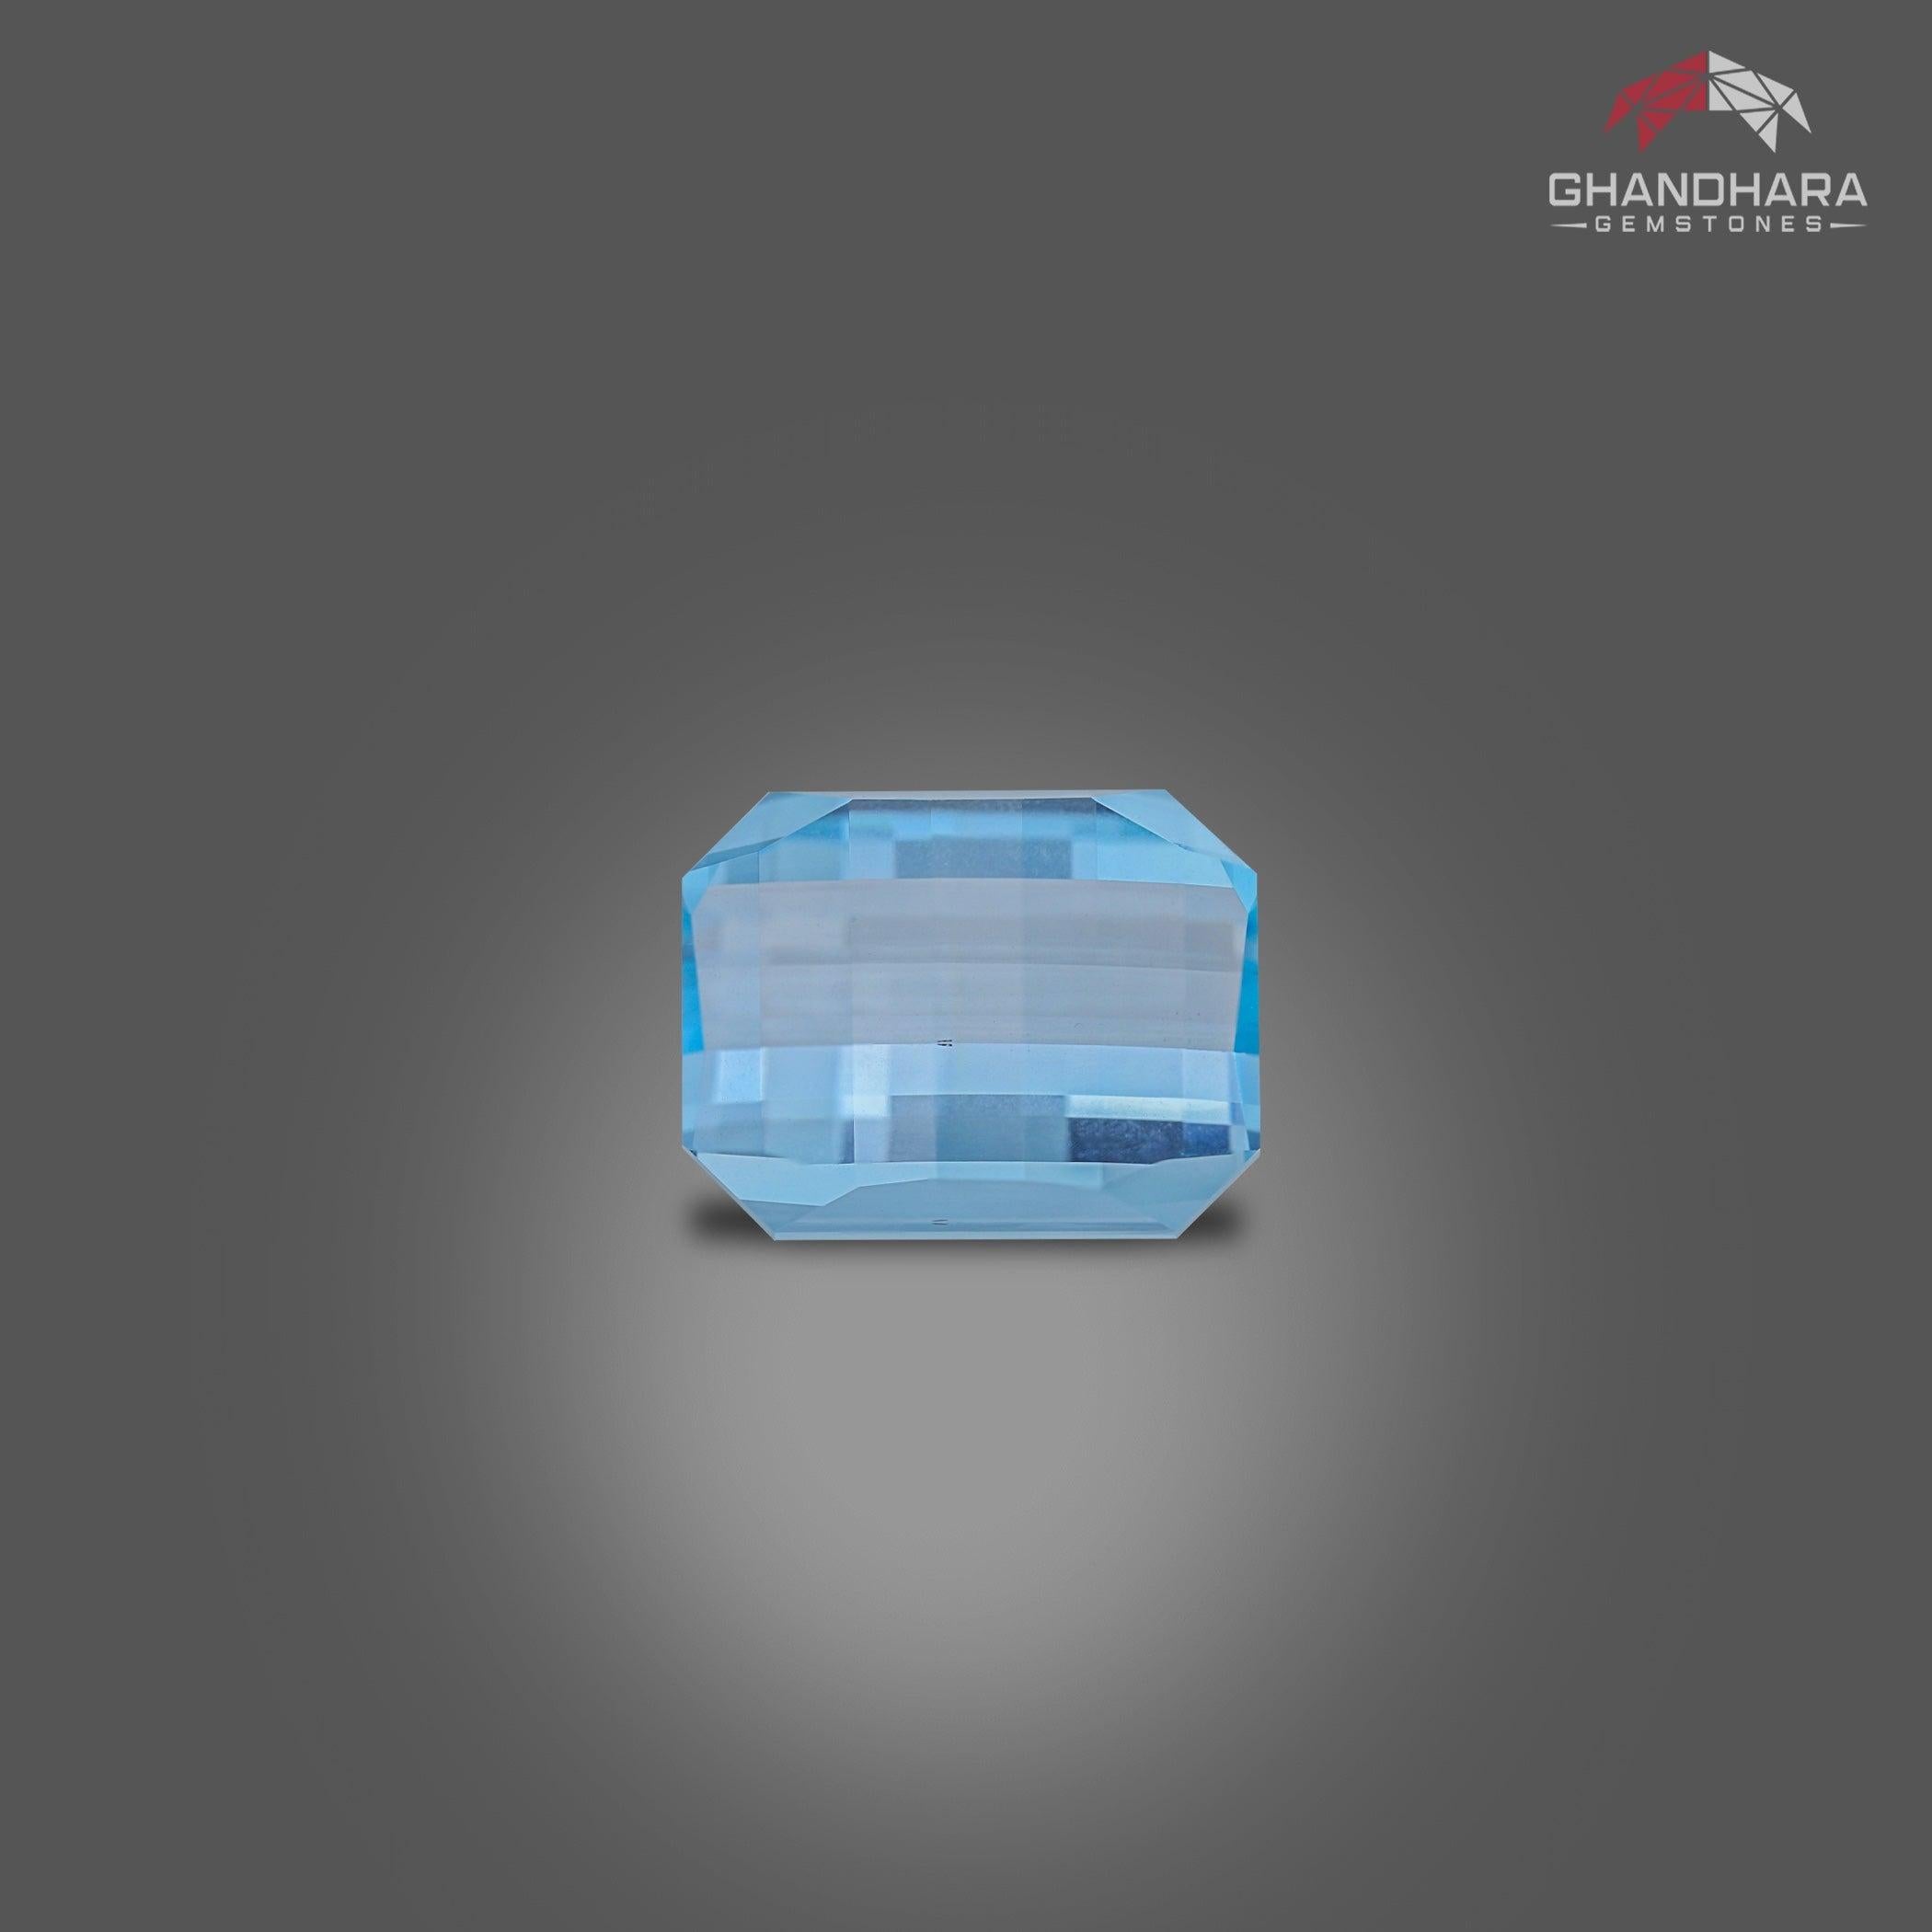 Fancy Swiss Natural Blue Topaz of 31.80 carats from Africa, Pakistan has a wonderful cut in a Octagon shape, incredible Blue color. Great brilliance. This gem is Loupe Clean  Clarity. 

Product Information:
GEMSTONE NAME: Fancy Swiss Natural Blue